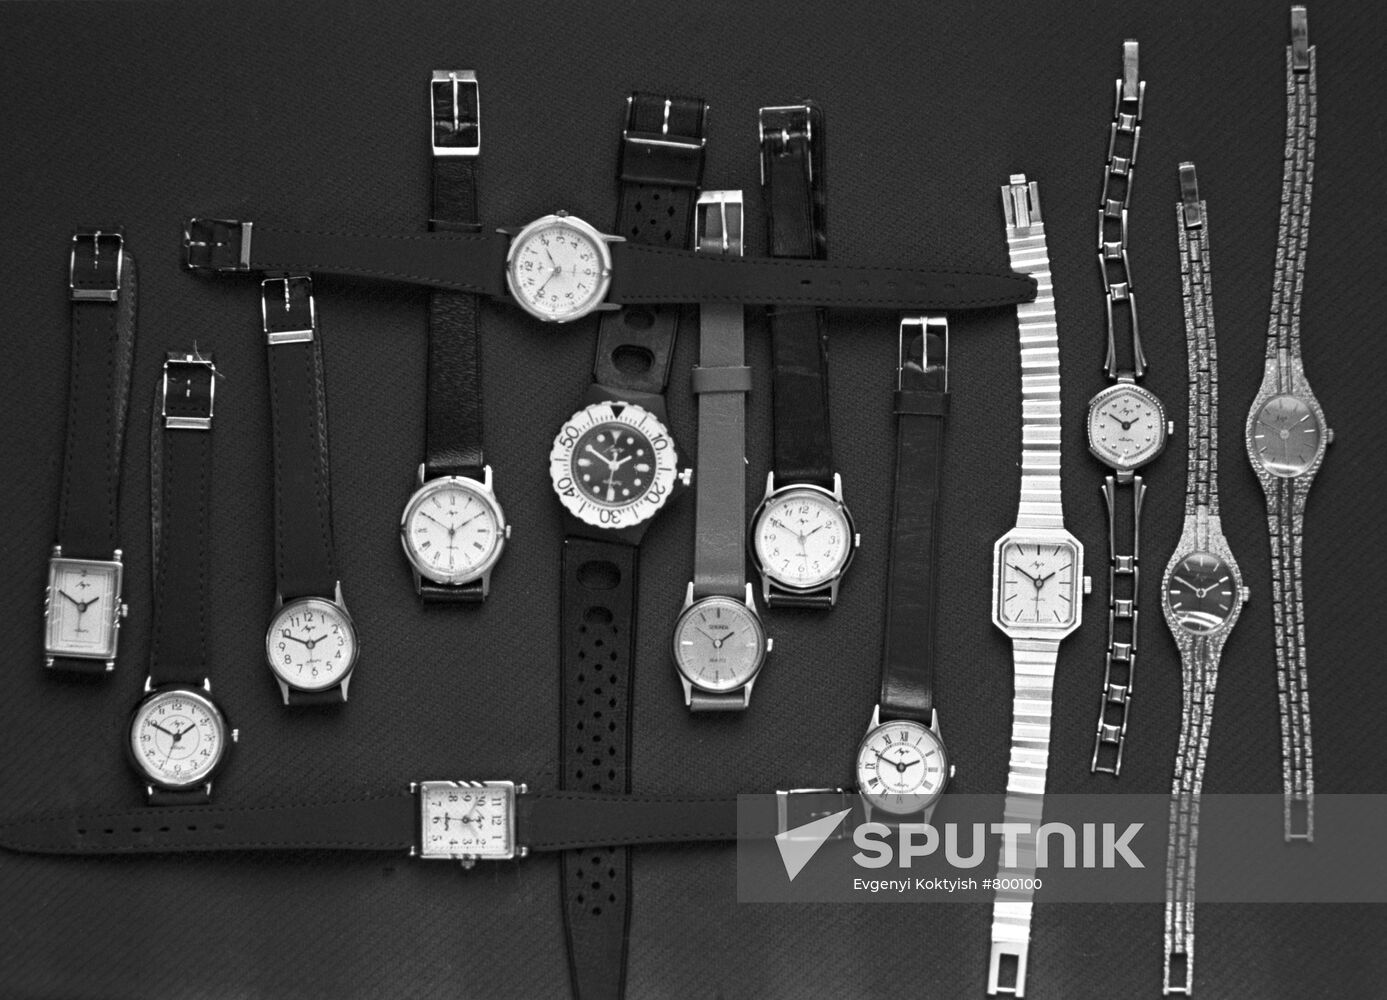 Products of the Minsk Watch Plant